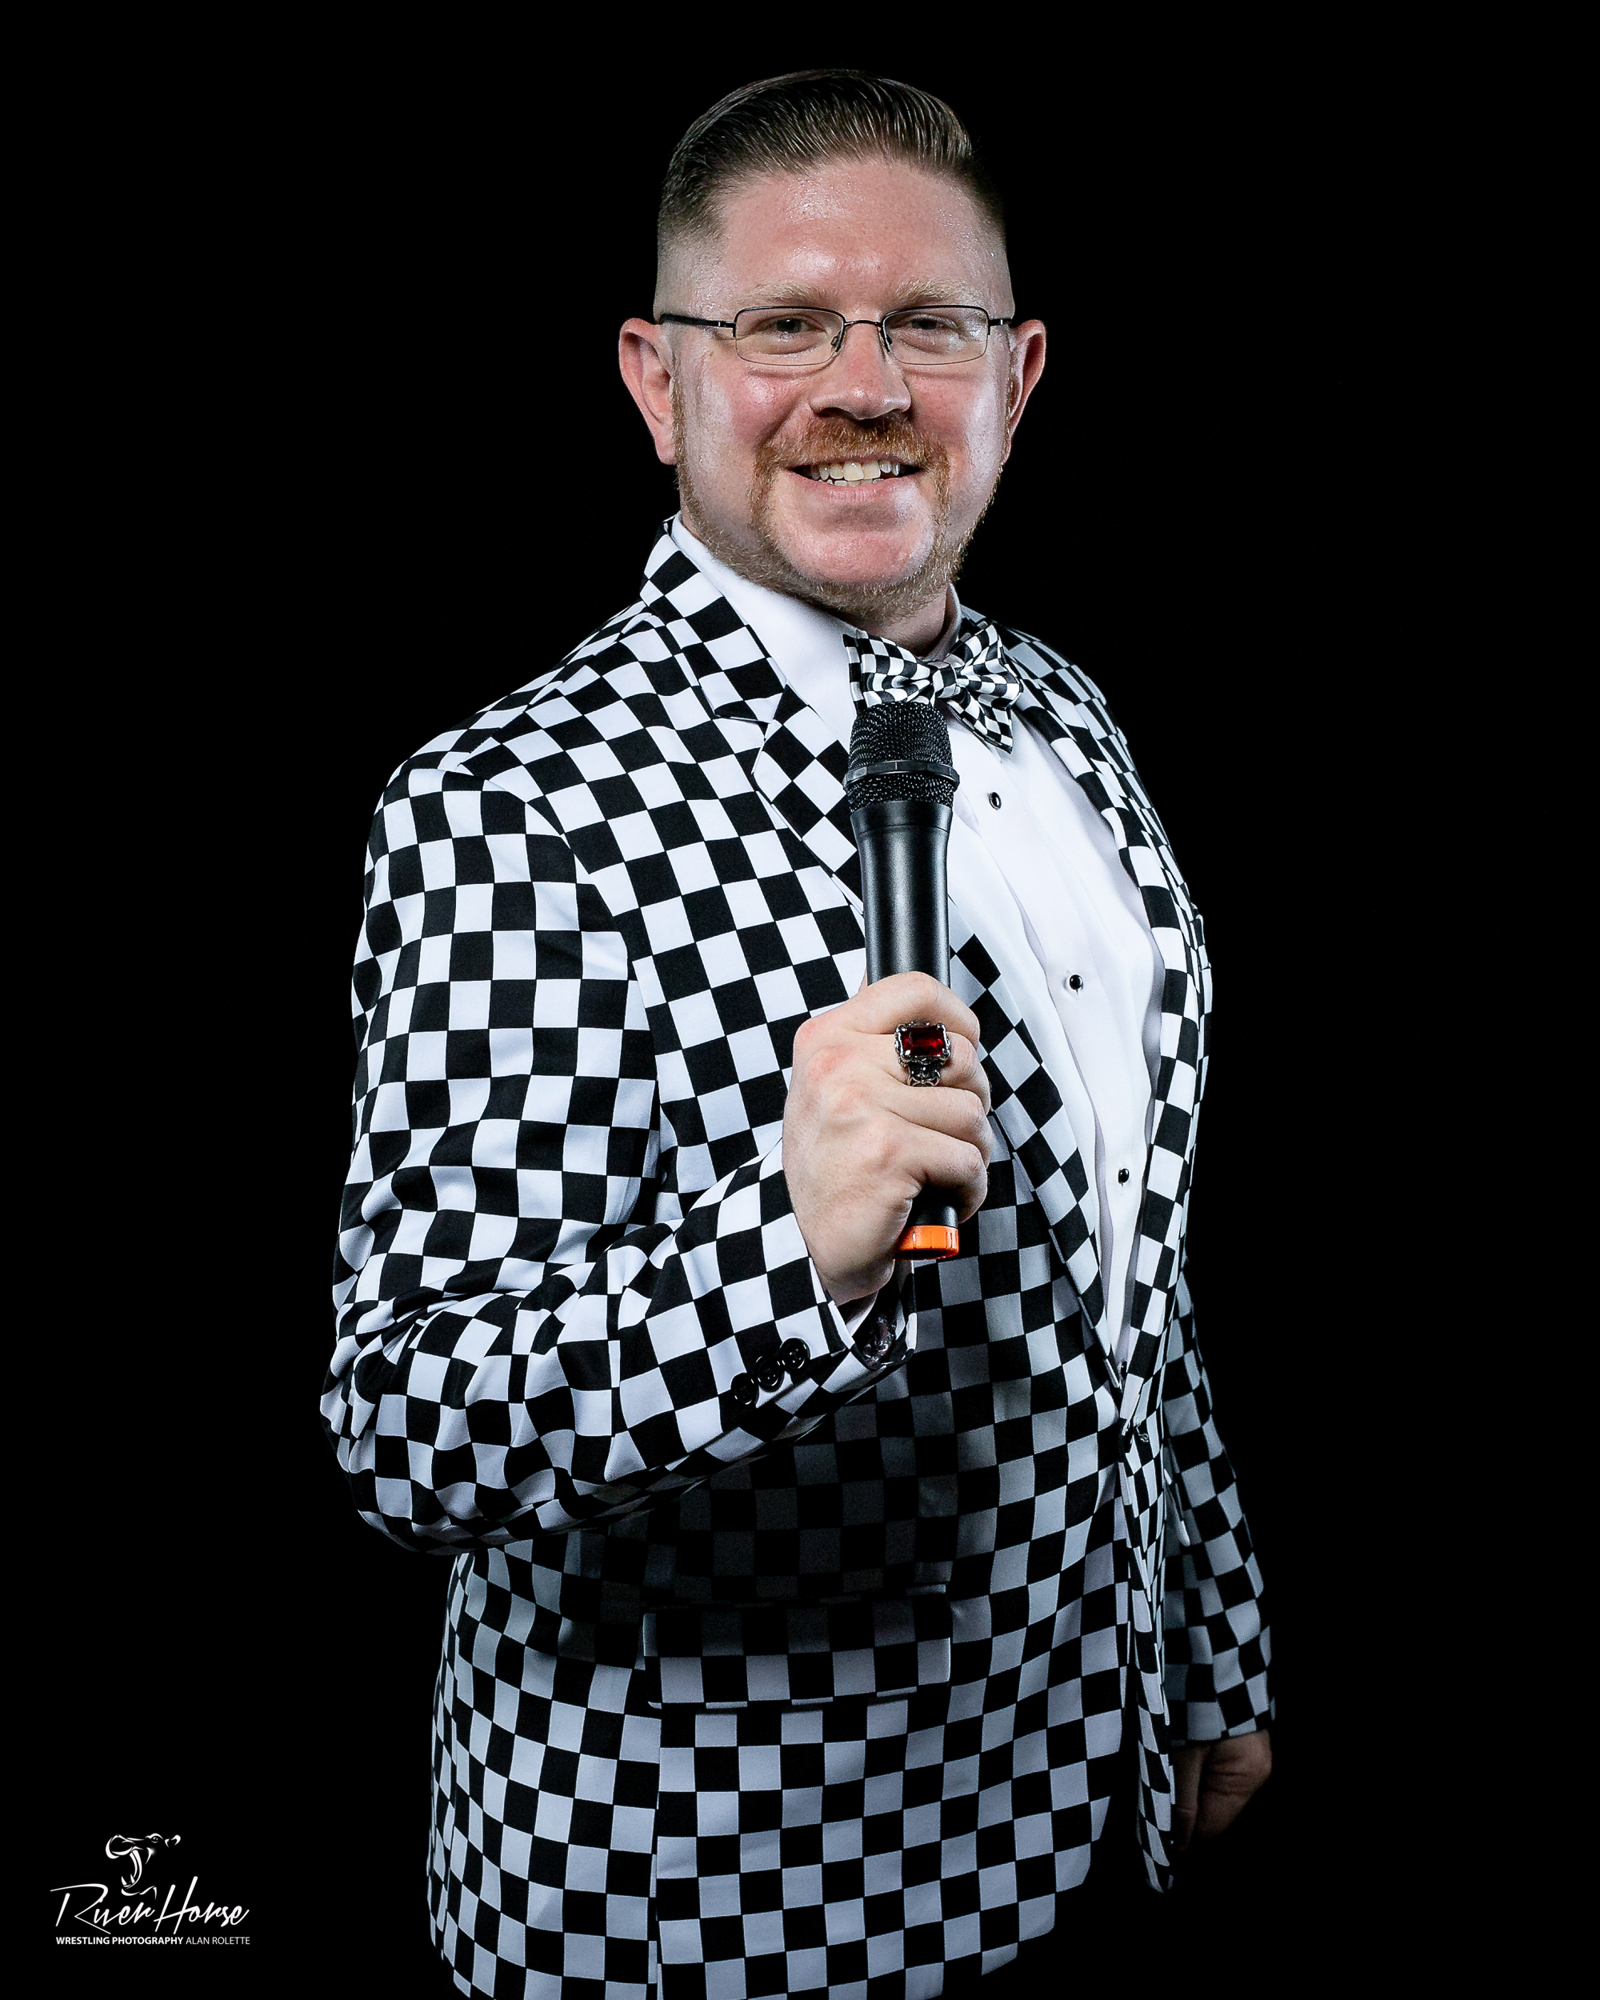 Matt Graifer, the Young Professor, will wear his checkered flag suit when he hosts the driver introductions at the Aug. 27 NASCAR Cup Series race at Daytona International Speedway. Courtesy photo 